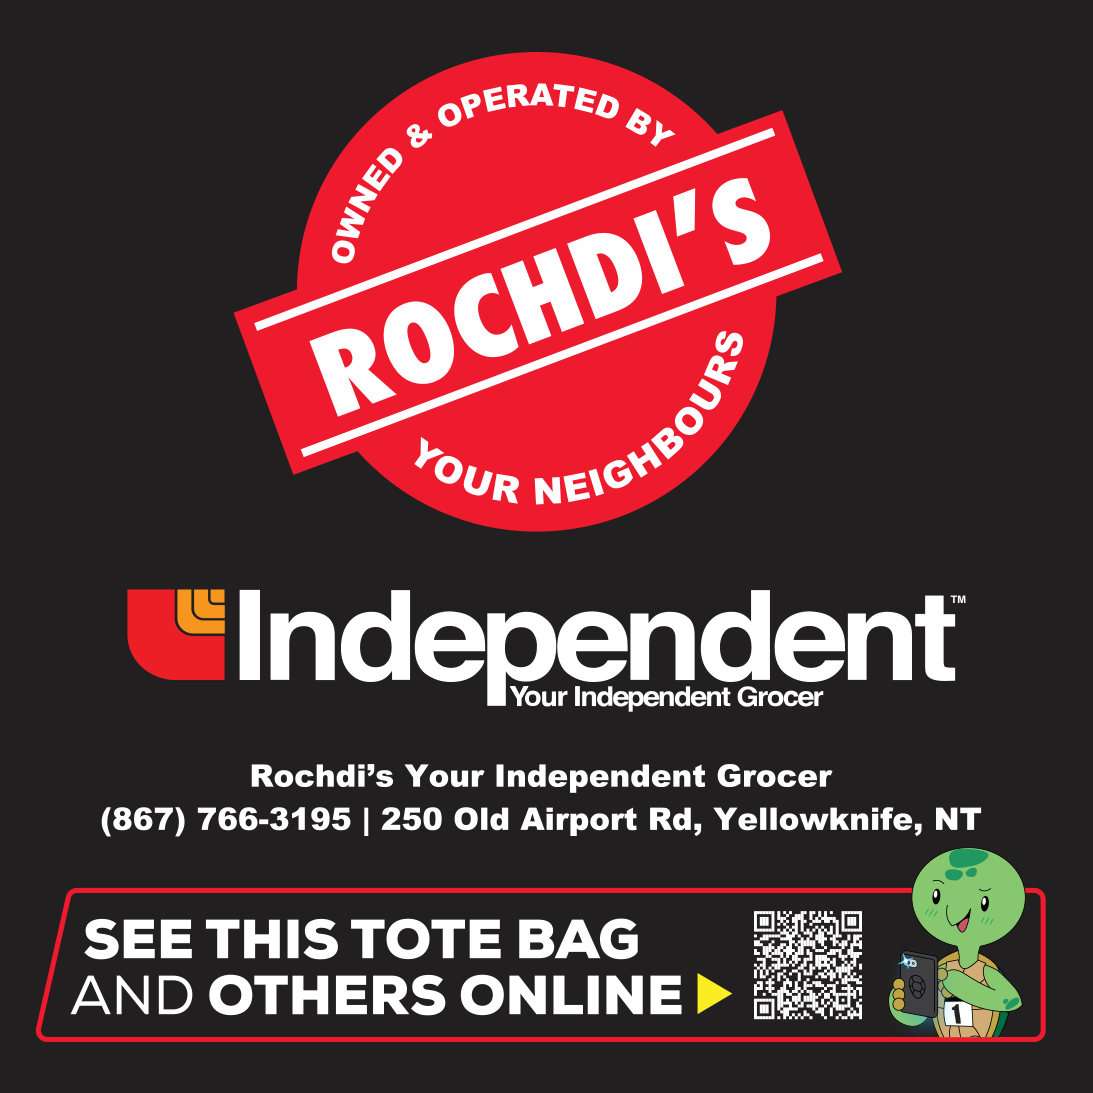 Rochdi's Your Independent